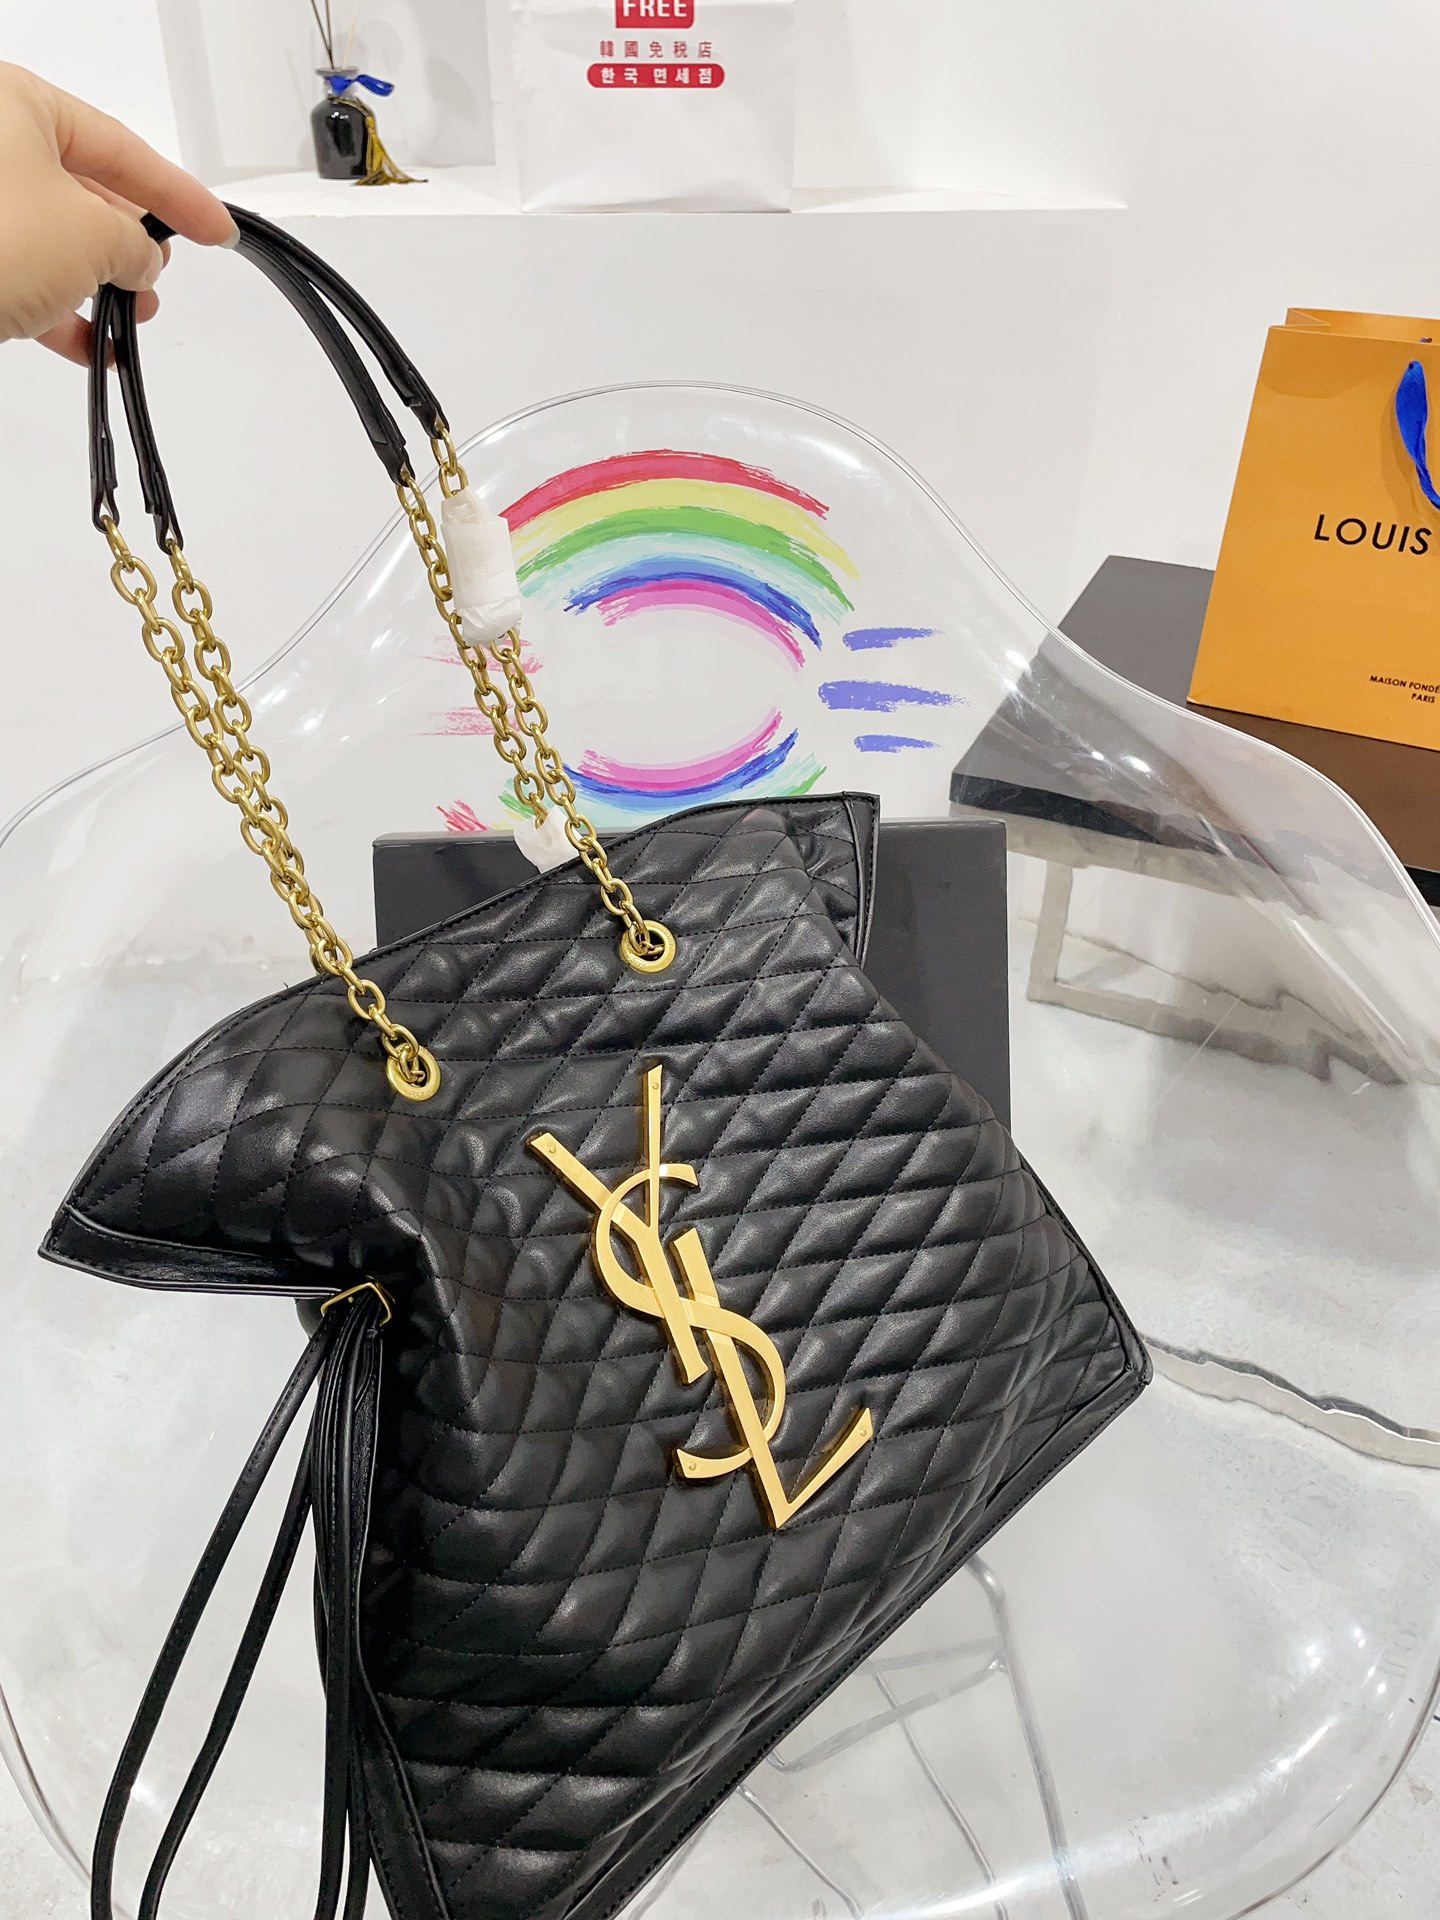 It comes with a boxed YSL shopping bag. It looks so pretty on my small waist. I love this bag so muc